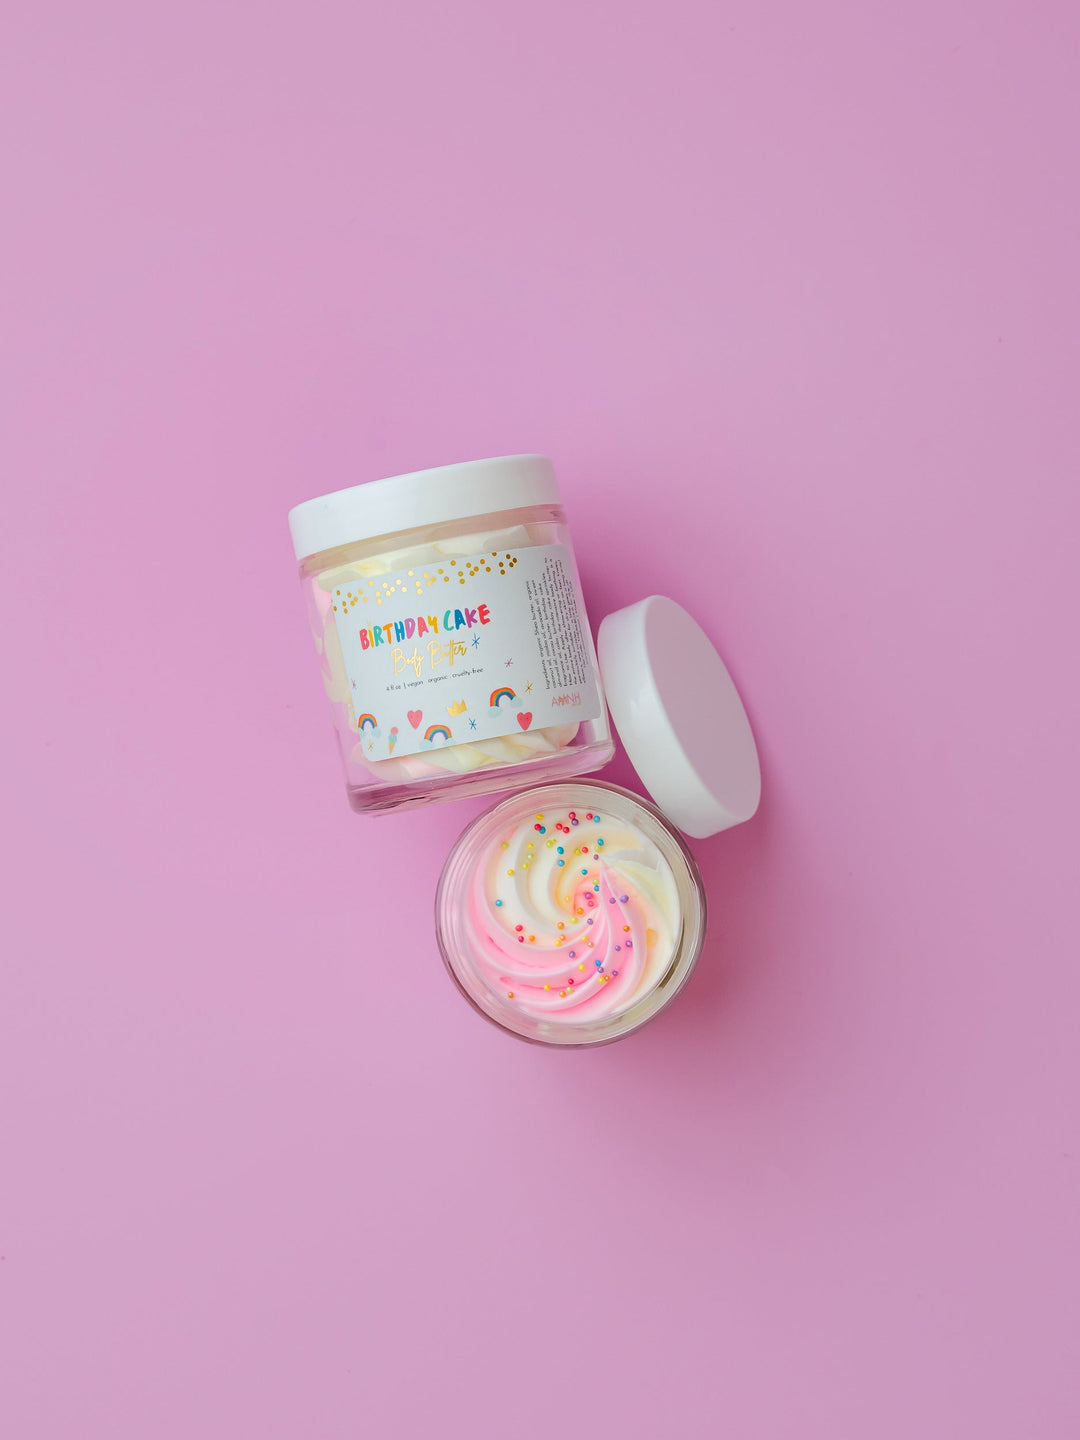 "Birthday Cake" Whipped Body Butter Personal Care AMINNAH 4oz 